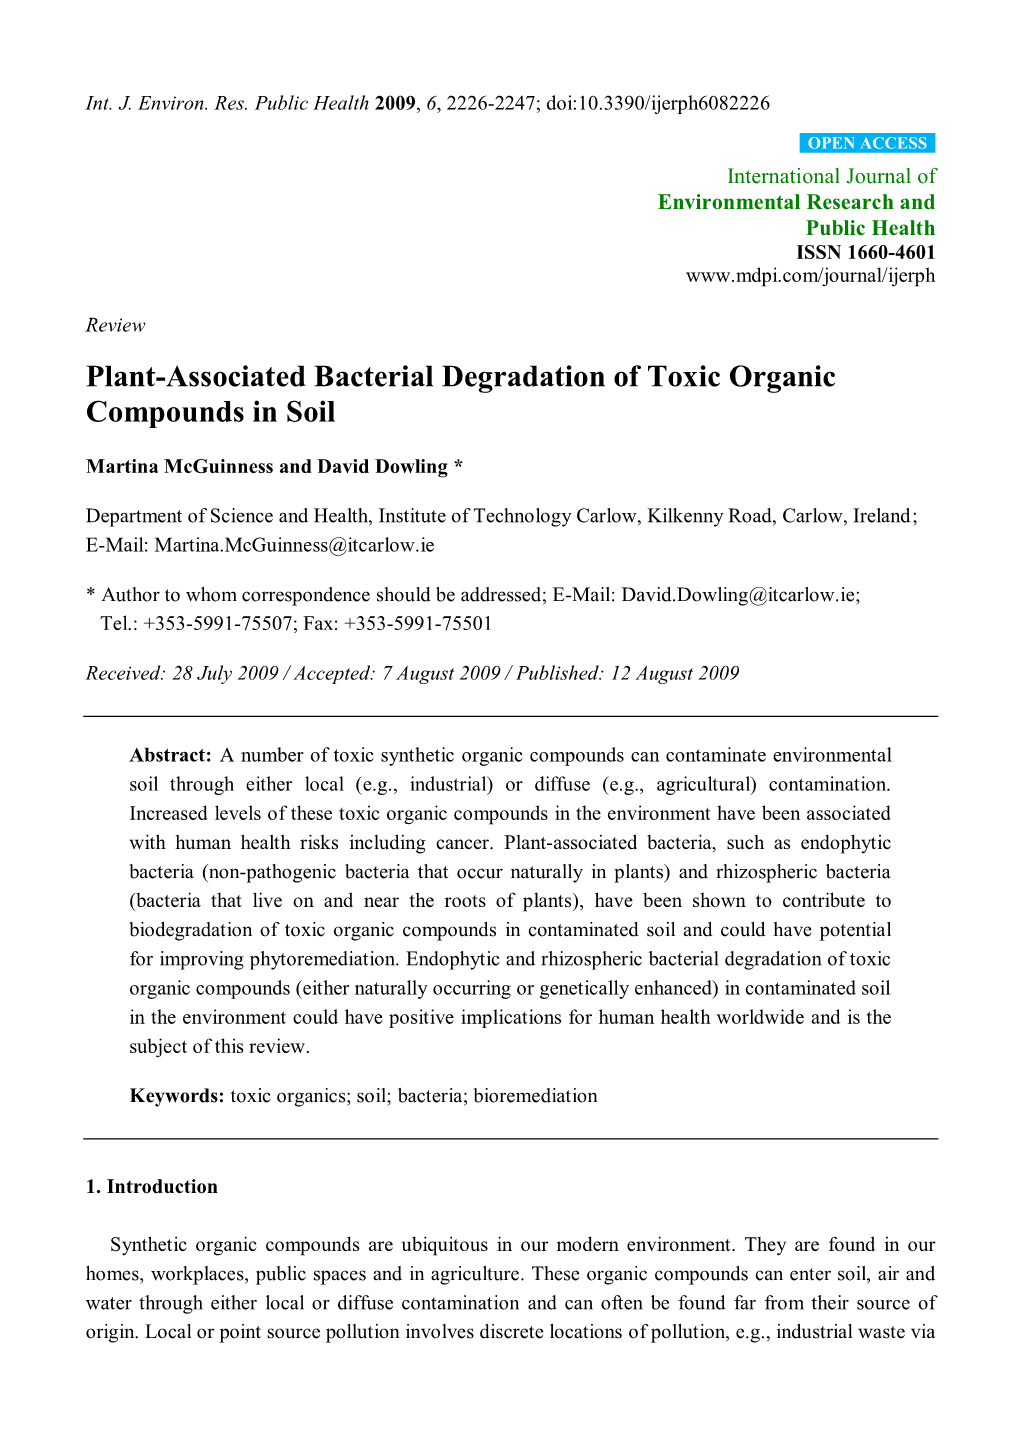 Plant-Associated Bacterial Degradation of Toxic Organic Compounds in Soil